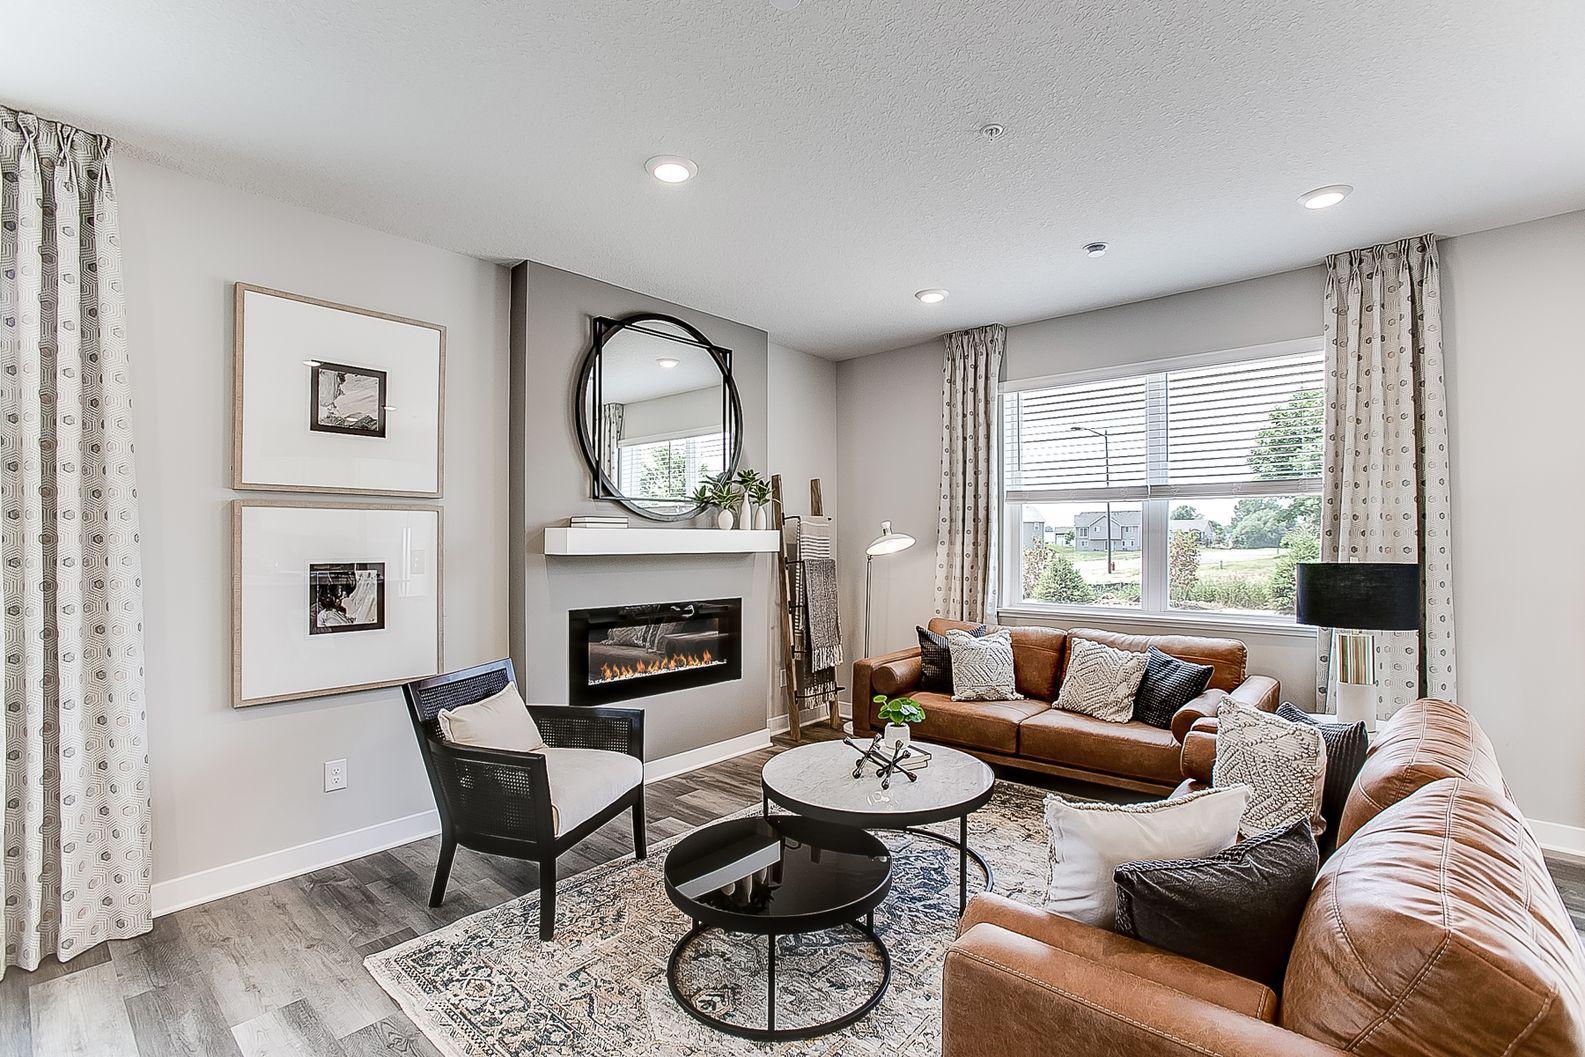 Large family room features a trendy electric fireplace and that creates year-round ambiance by utilizing the lights only function. Turn the heat up in the winter months.